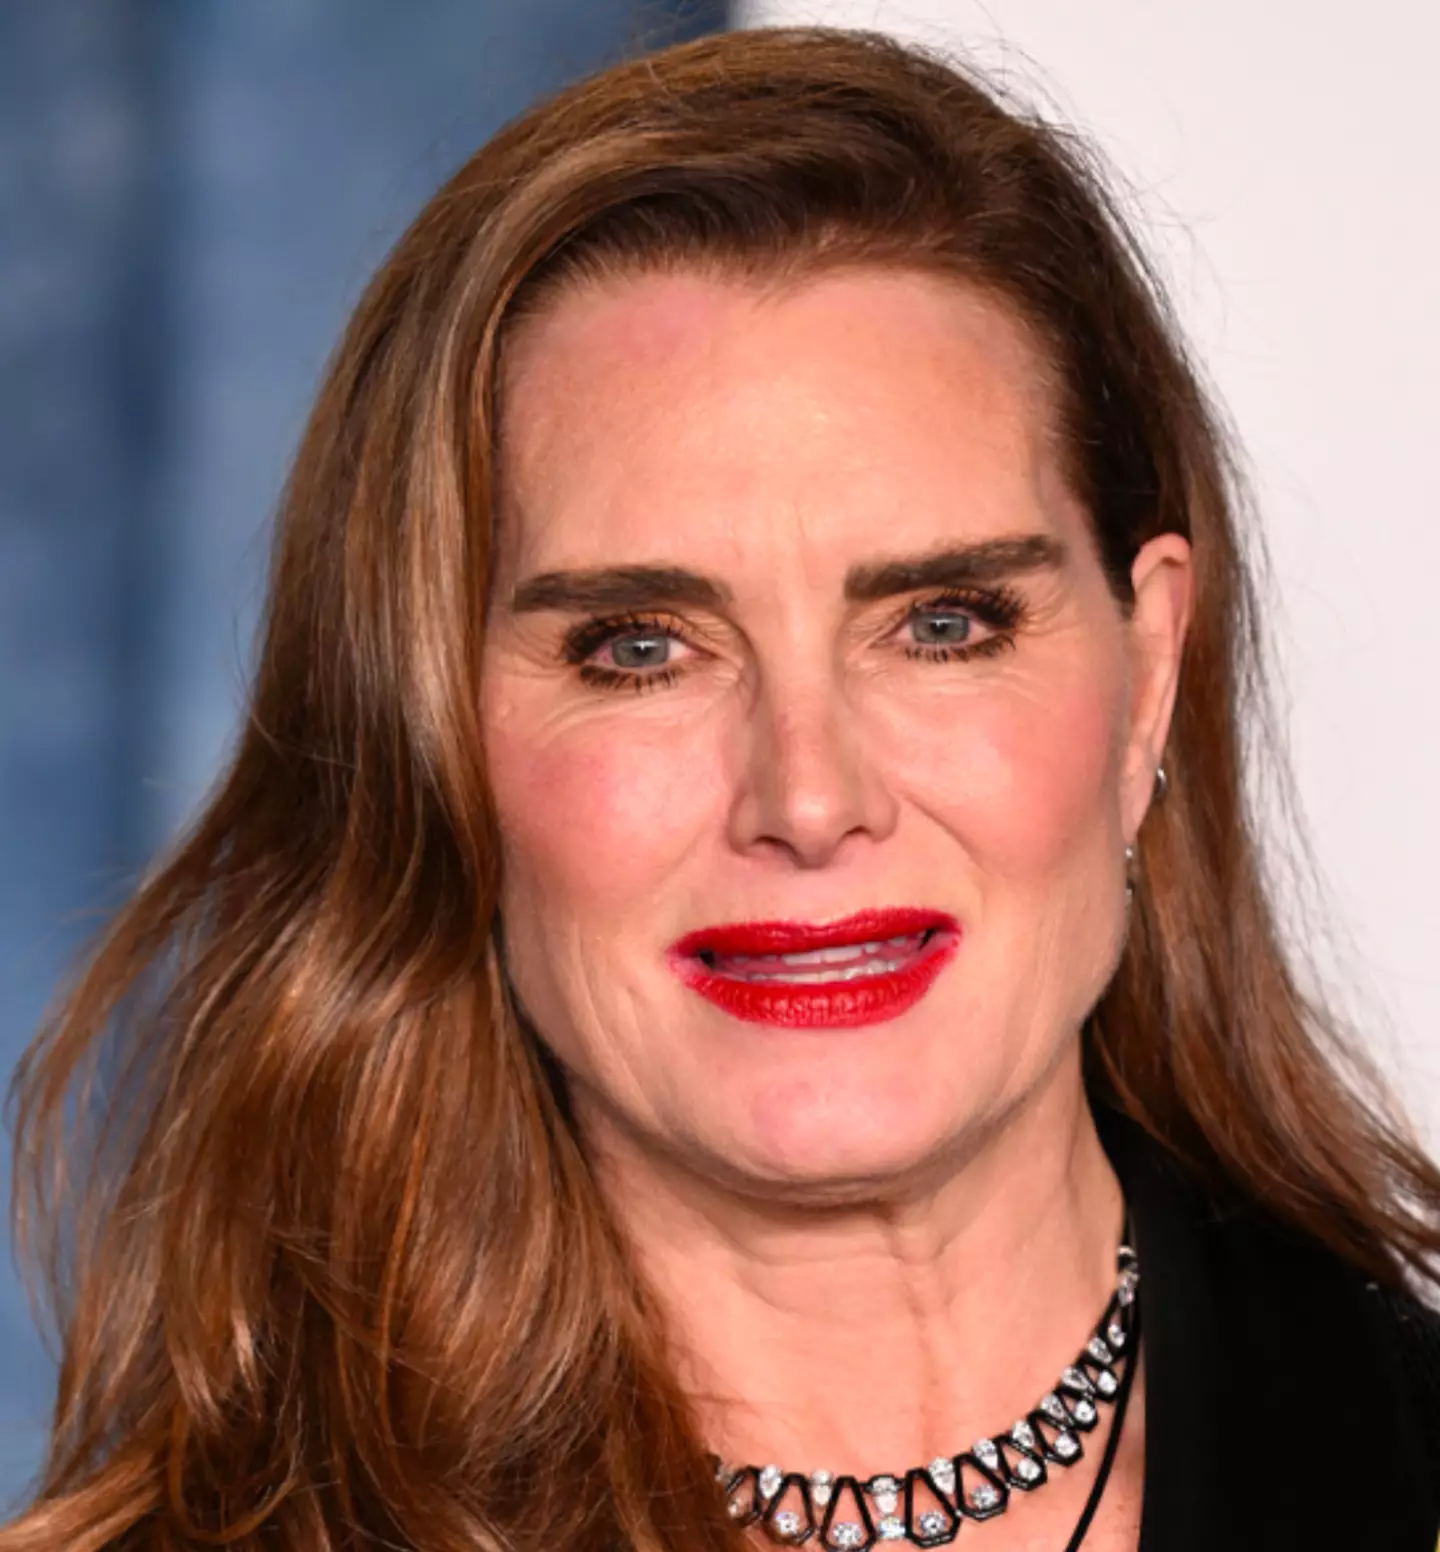 Brooke Shields has no complaints about the scene though.